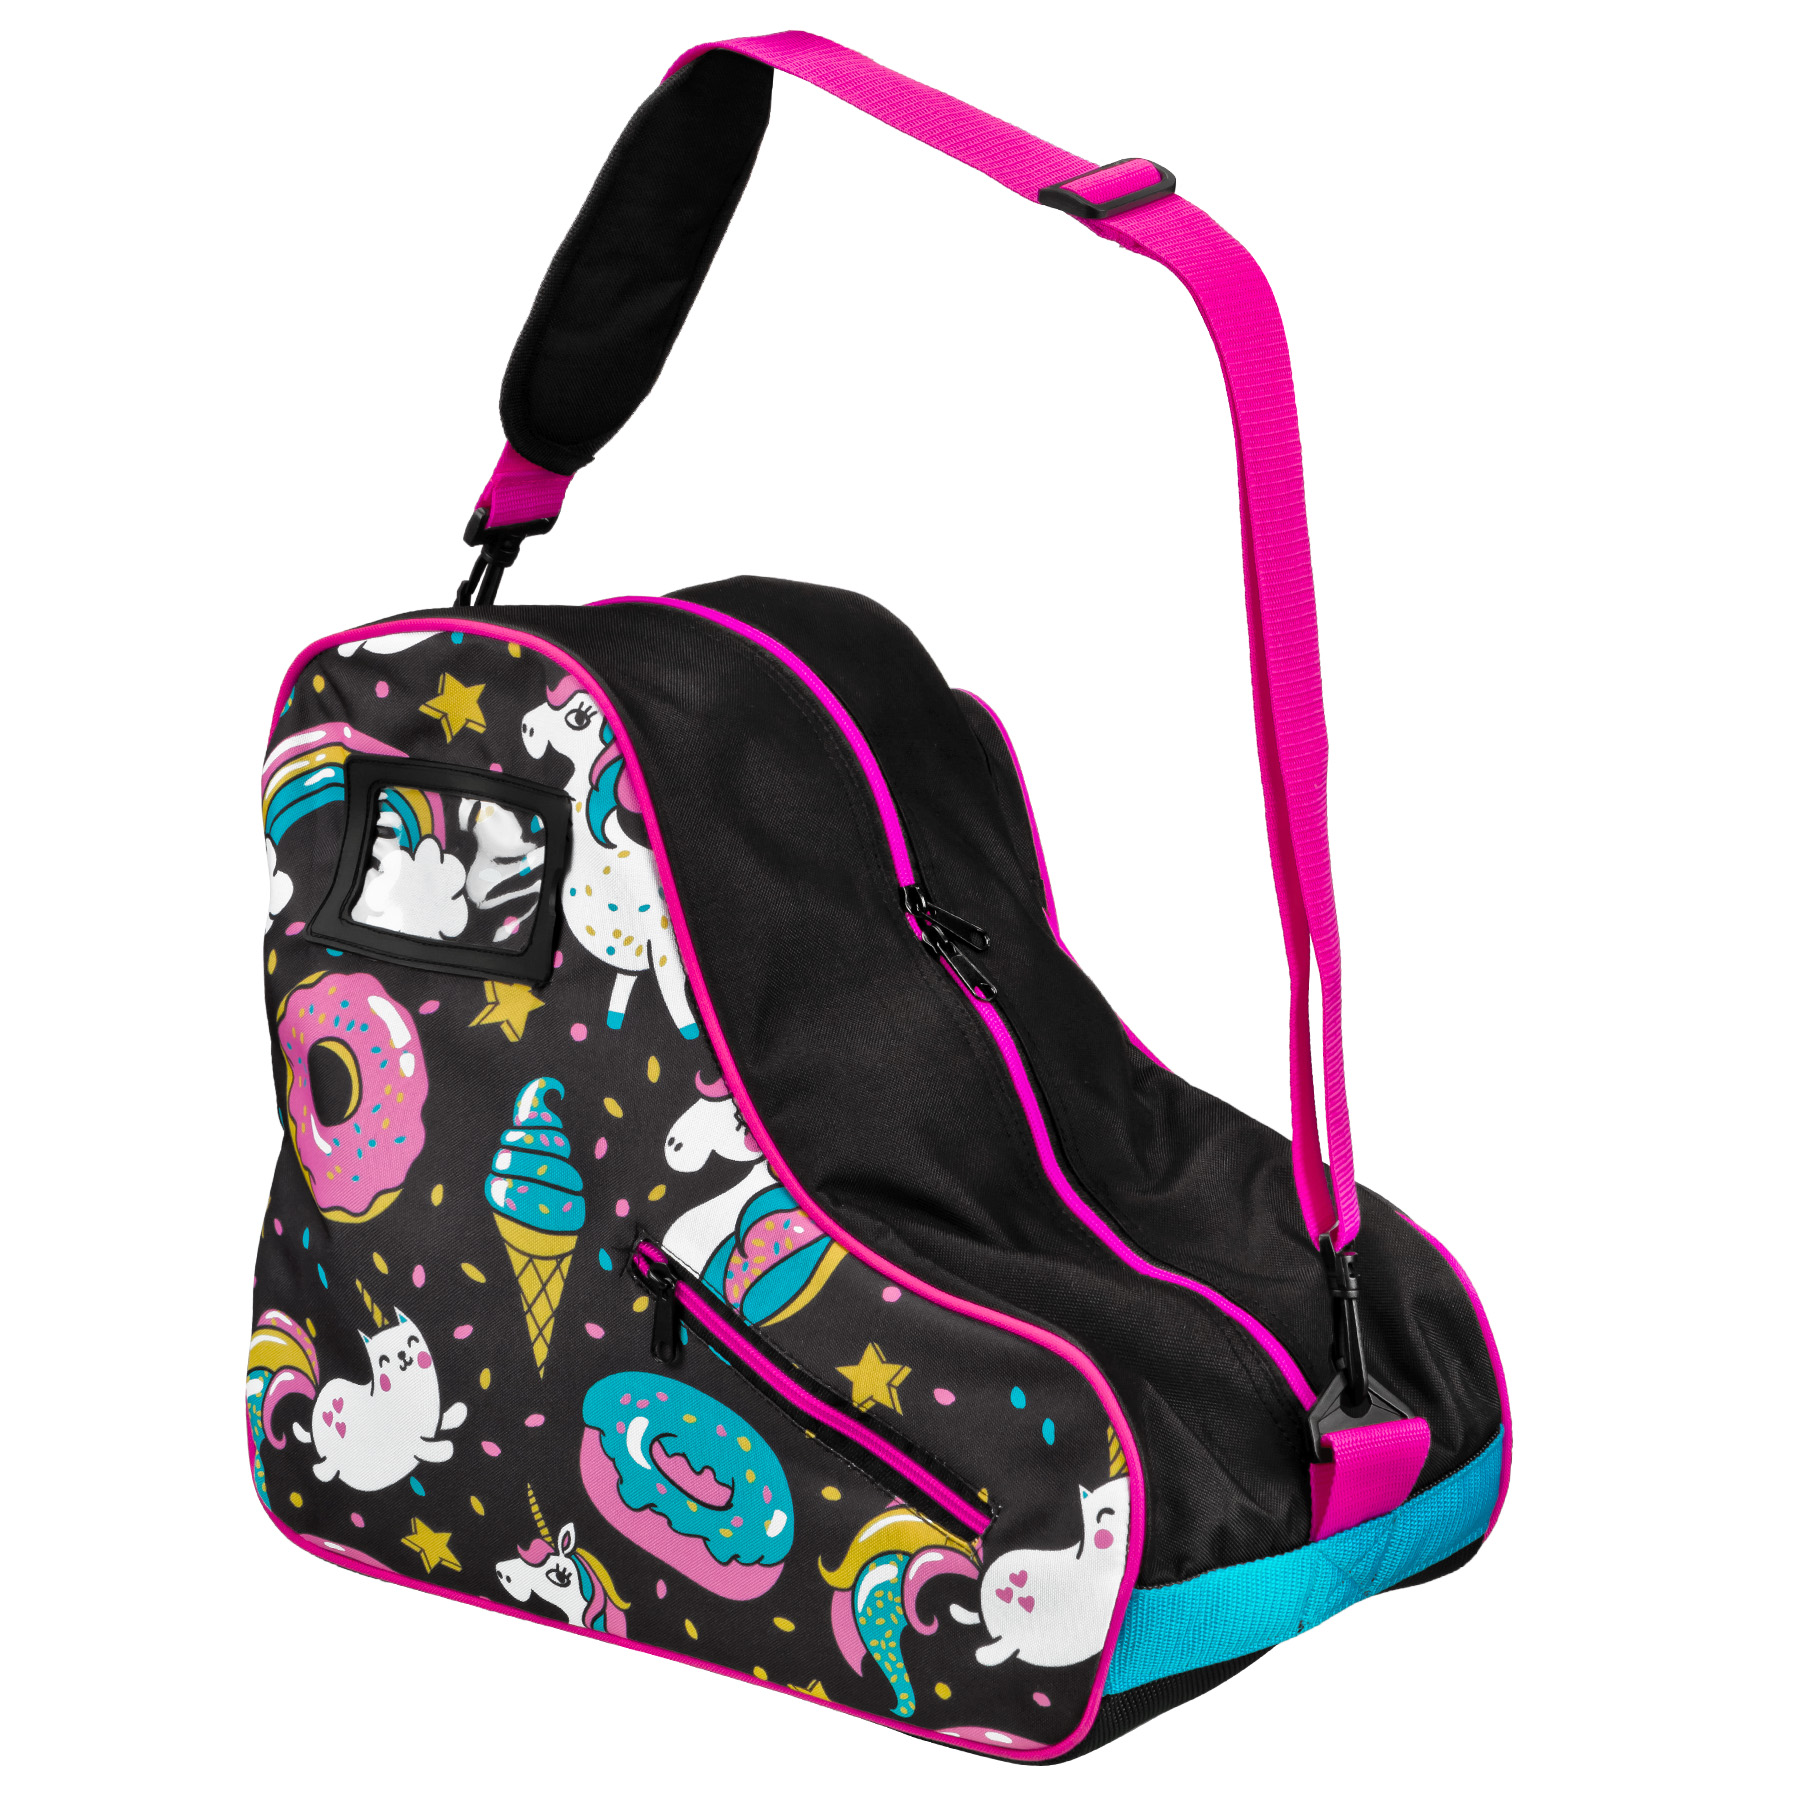 Ice Skate Bag, Roller Skate Bags for Women Men Girls and Boys, Large  Capacity Skate Bag Fits Quad Skates, Inline Skate and Most Roller Skate  Accessories(Blue+Pink) : Amazon.in: Sports, Fitness & Outdoors